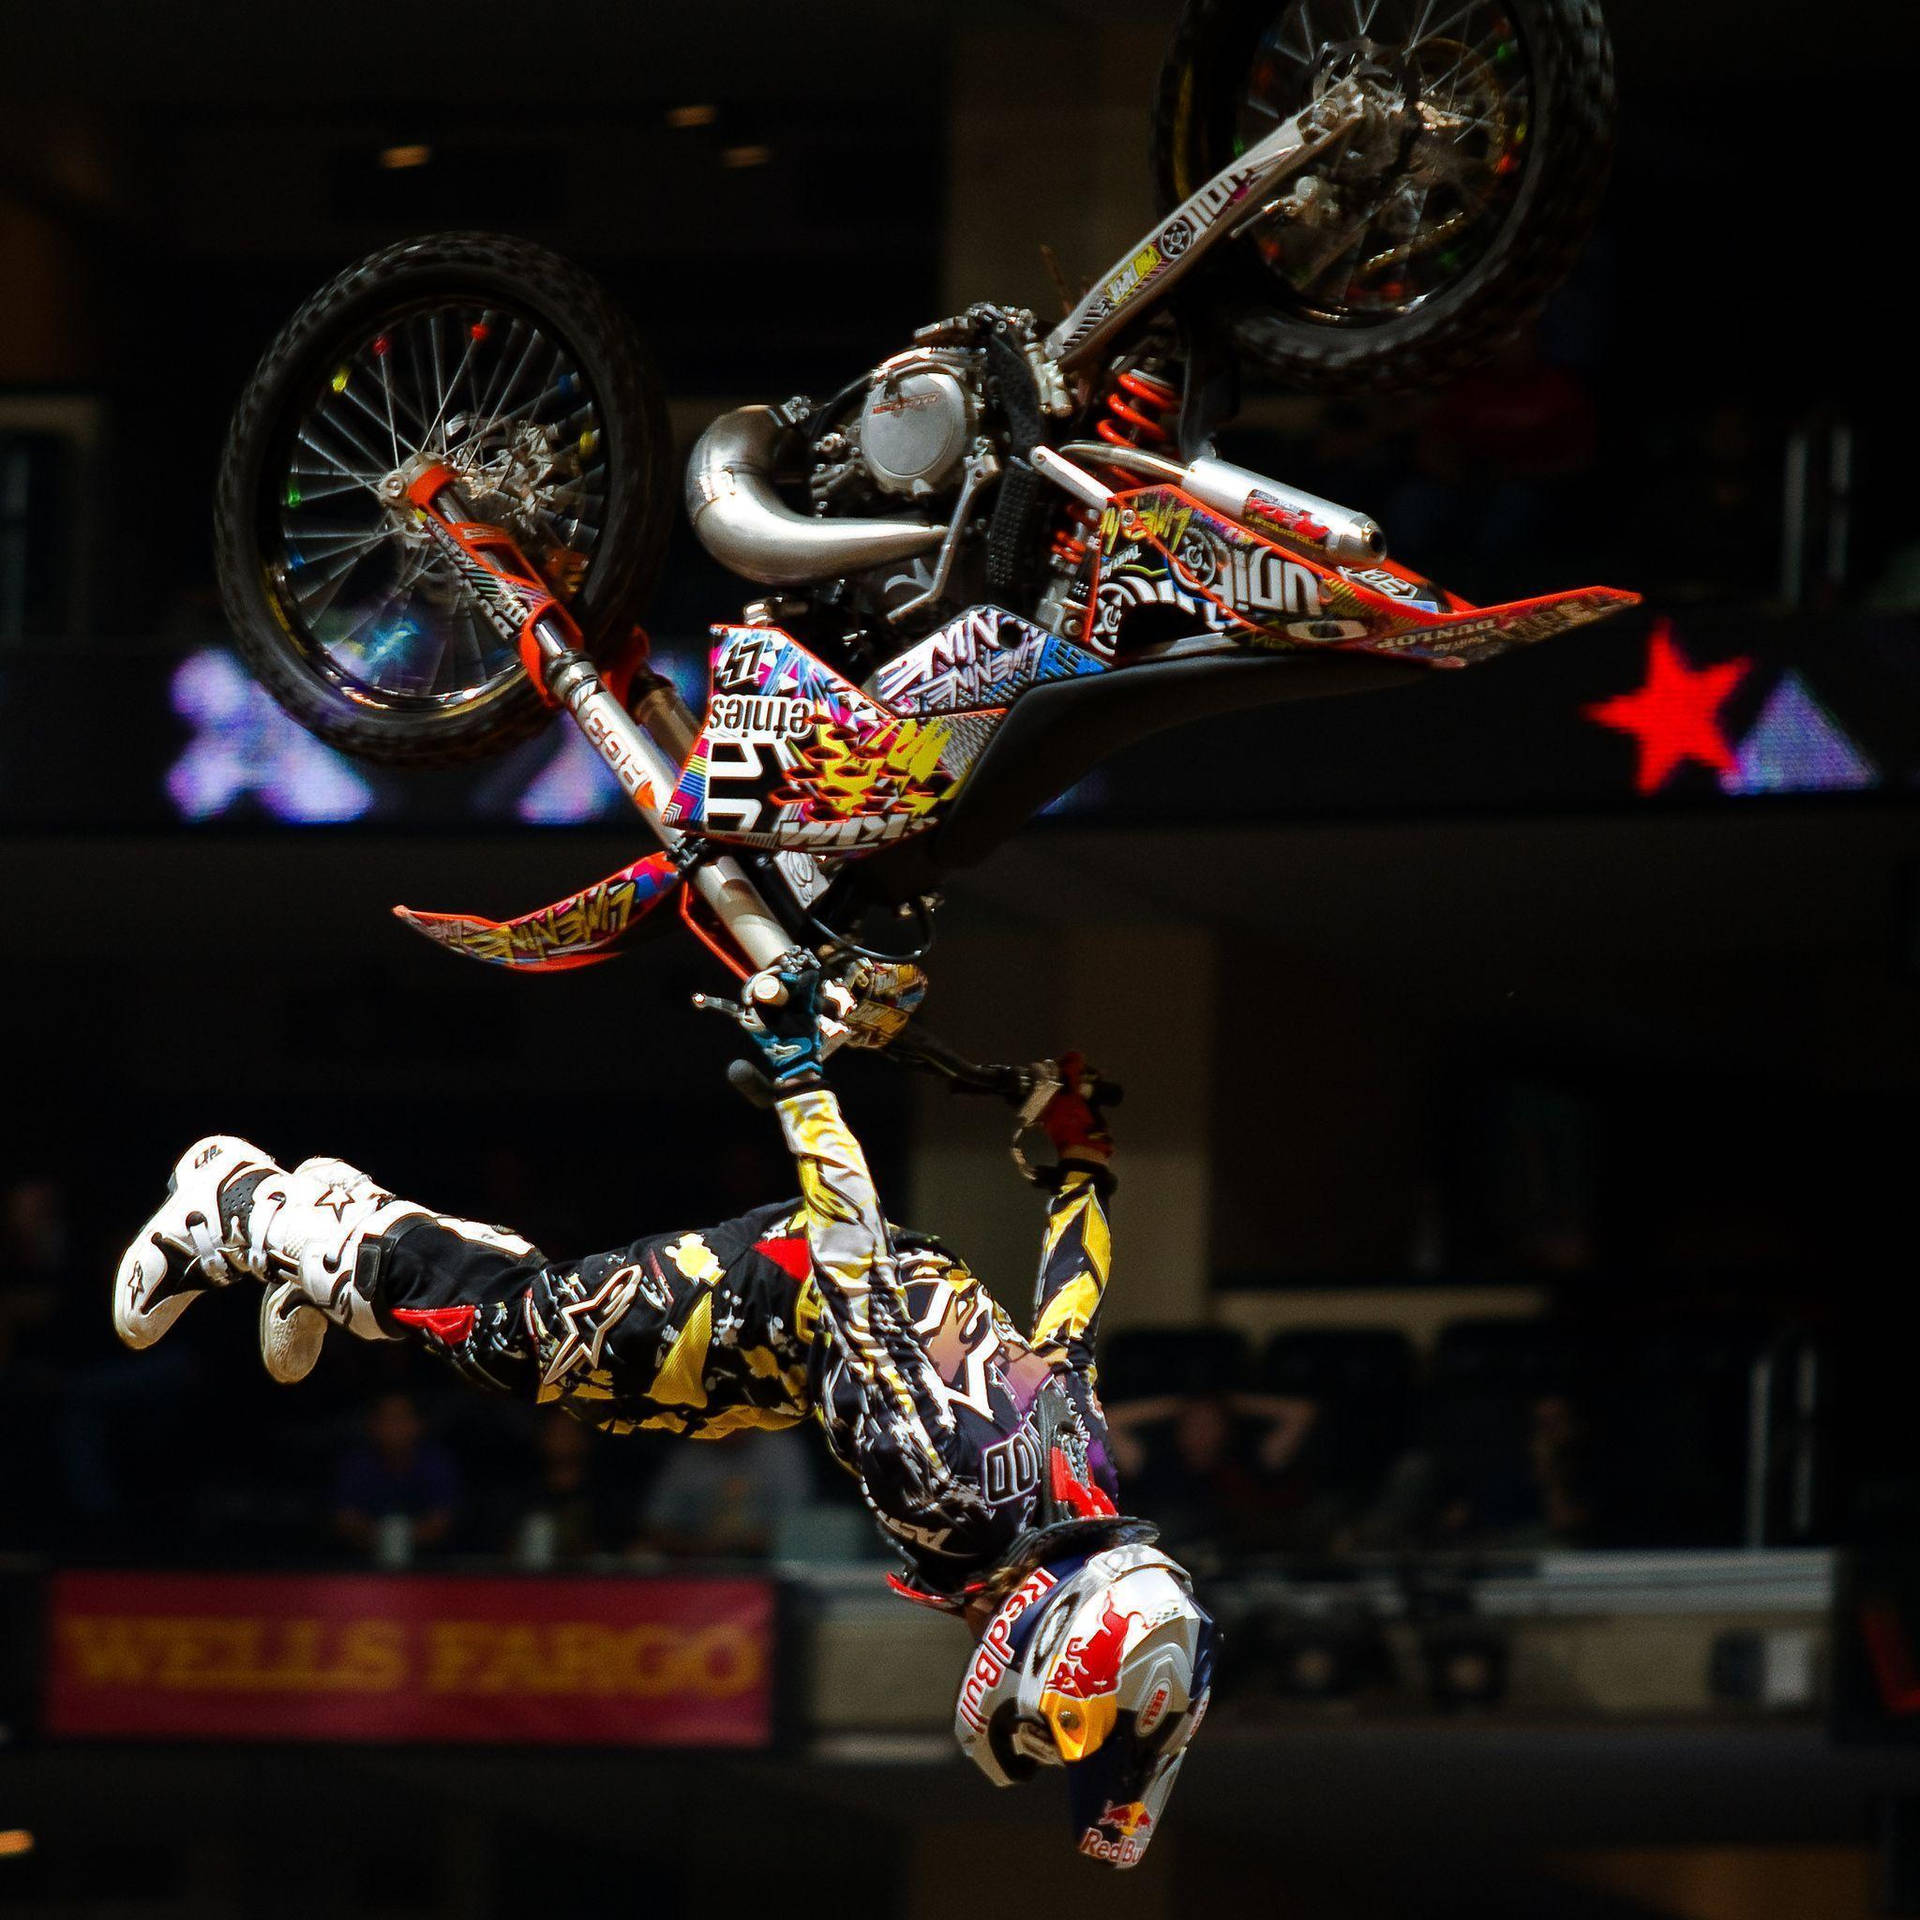 Fearless Motocross Rider Soaring In The Sky At X Games Background